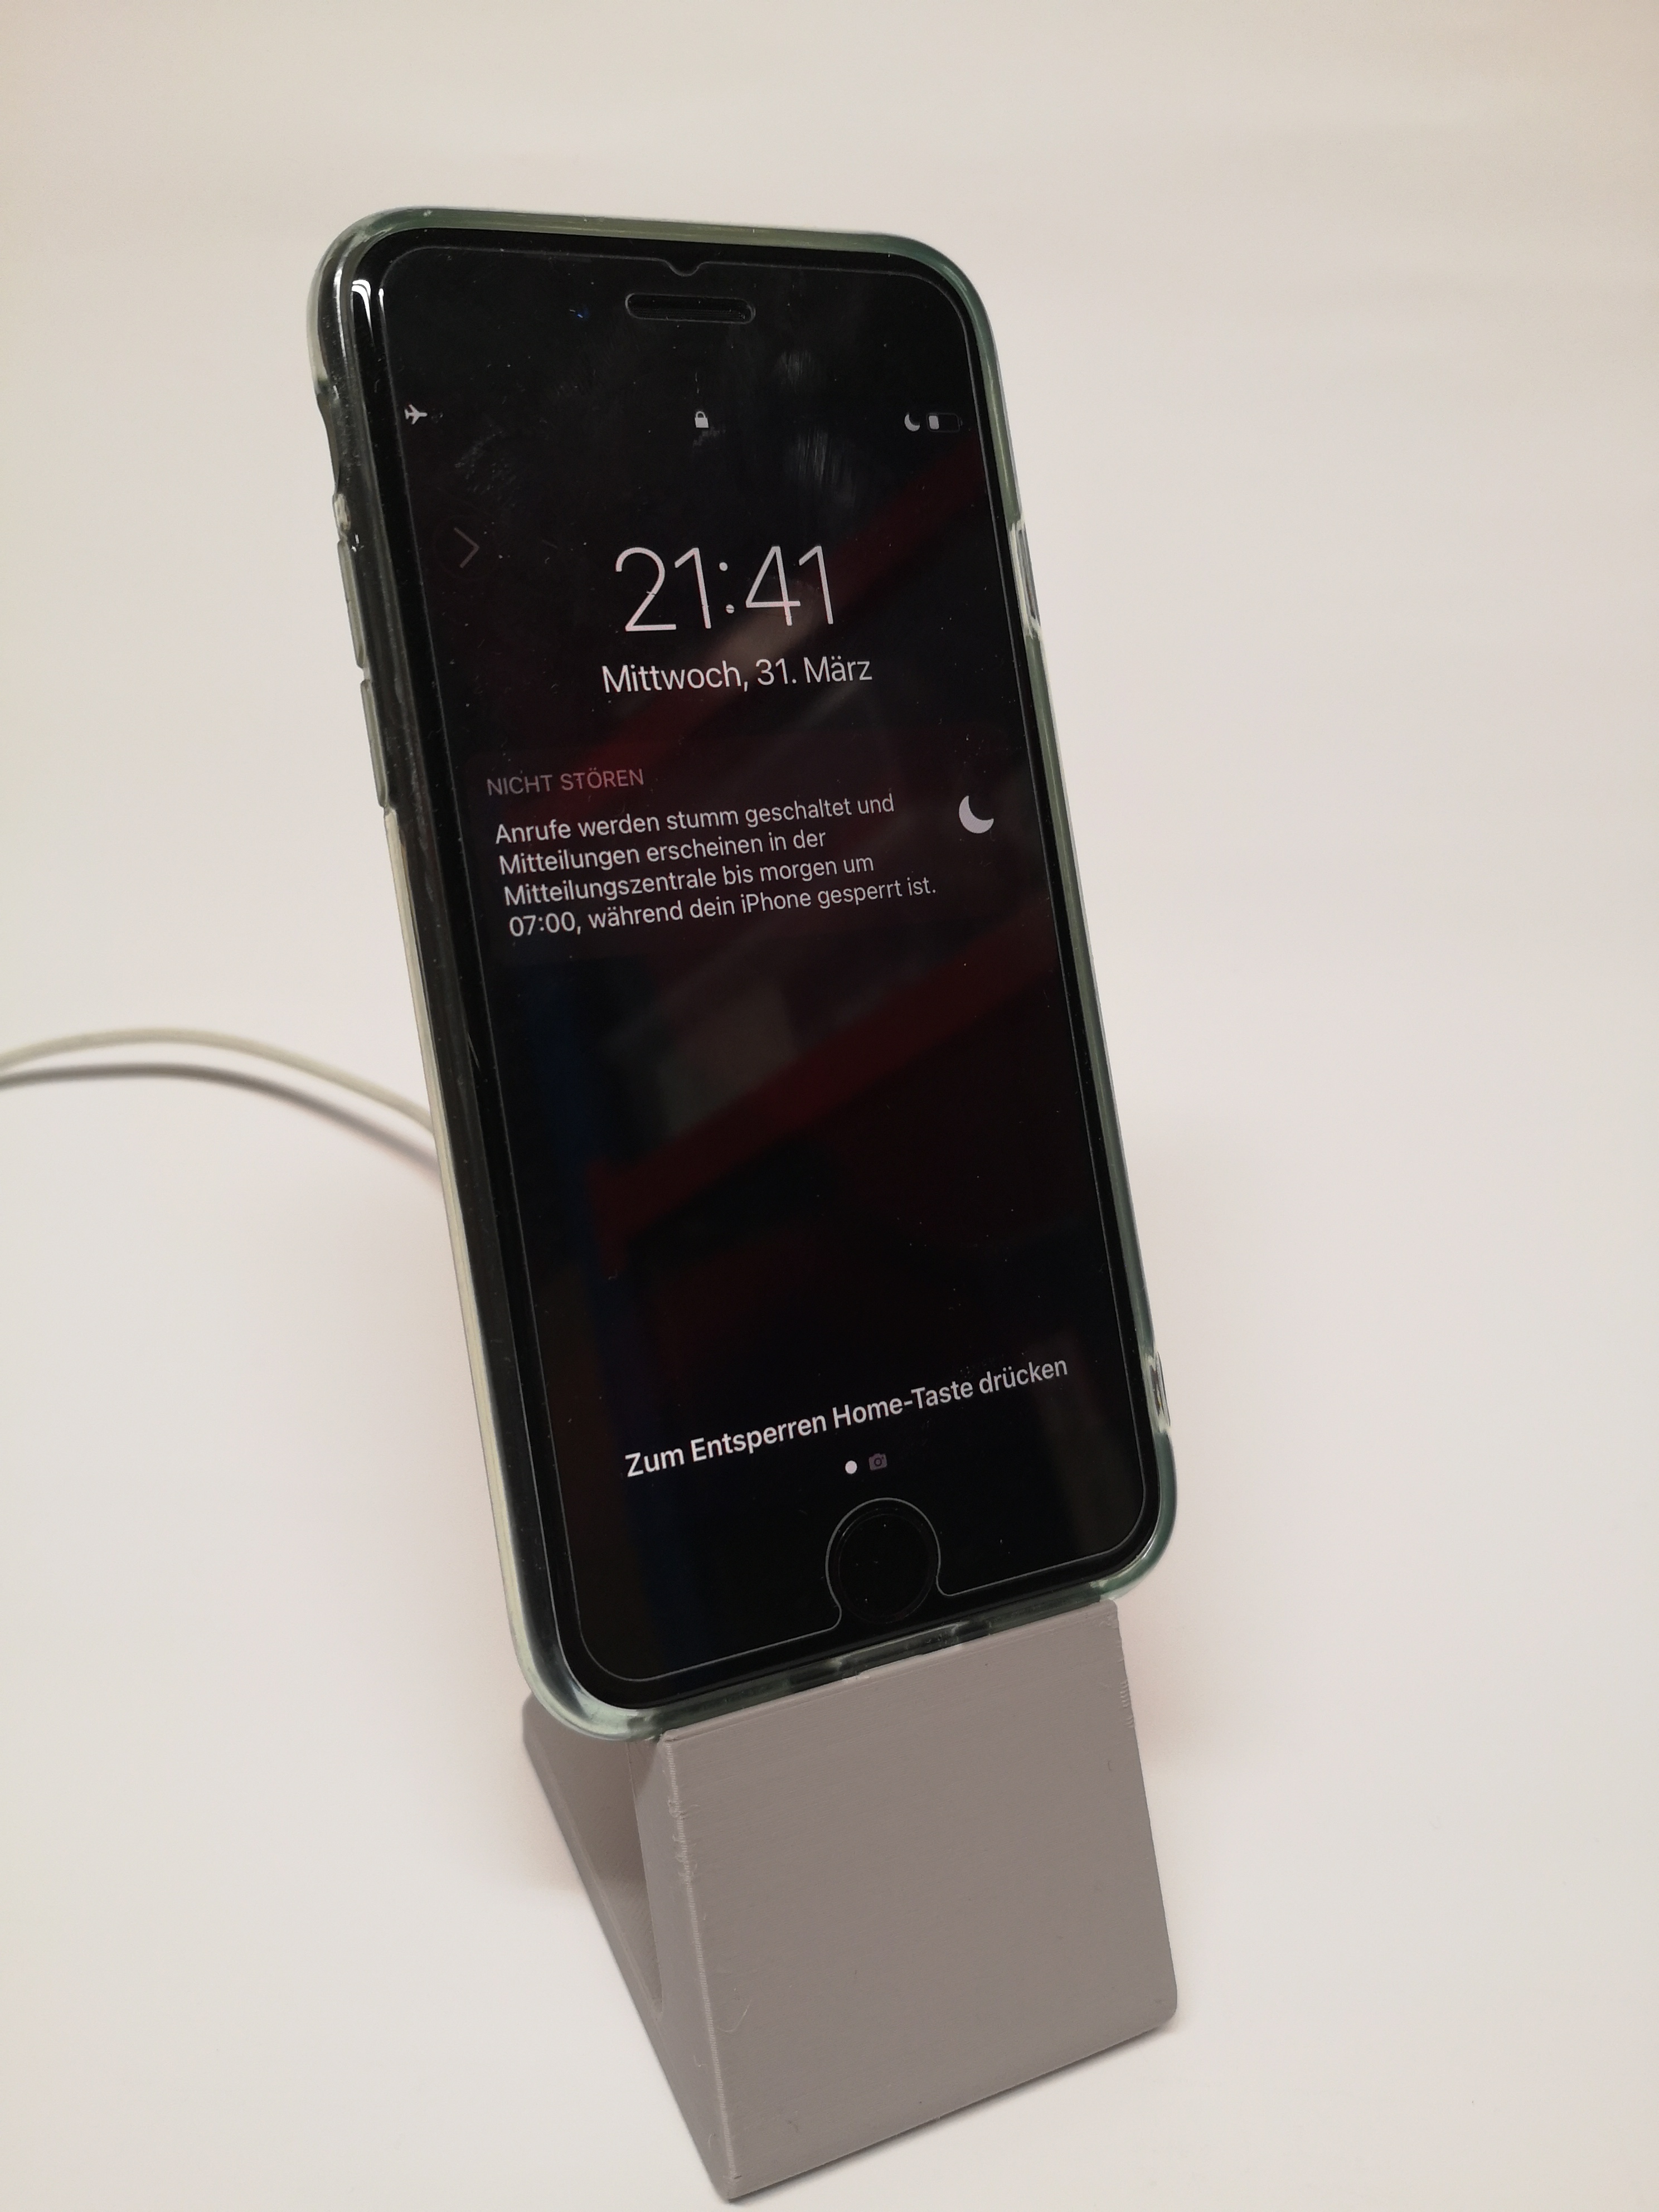 iPhone charging stand